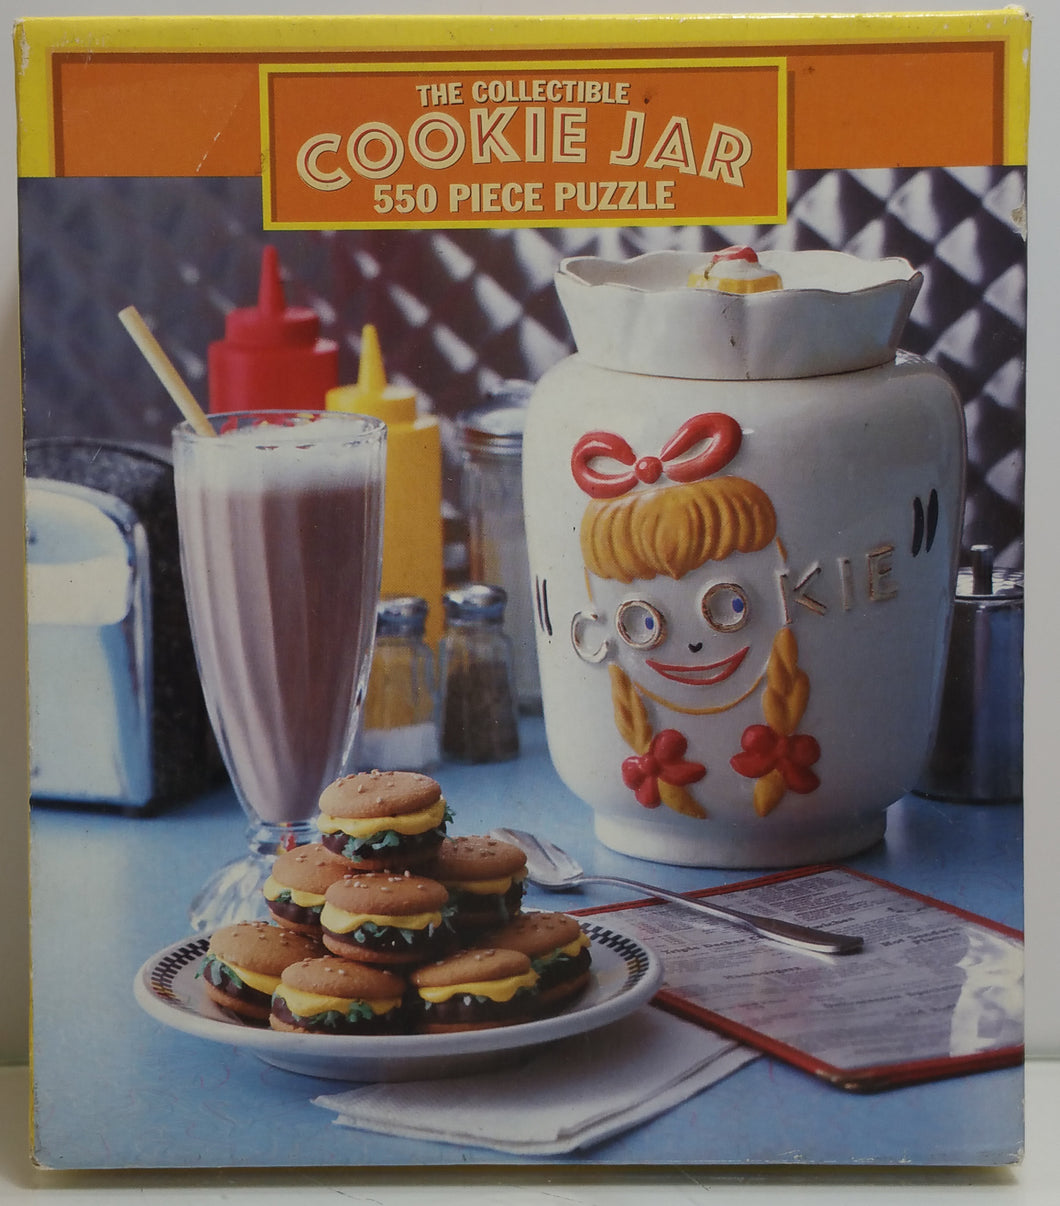 The Collectible Cookie Jar 500 Piece Puzzle - Masolut Superstore